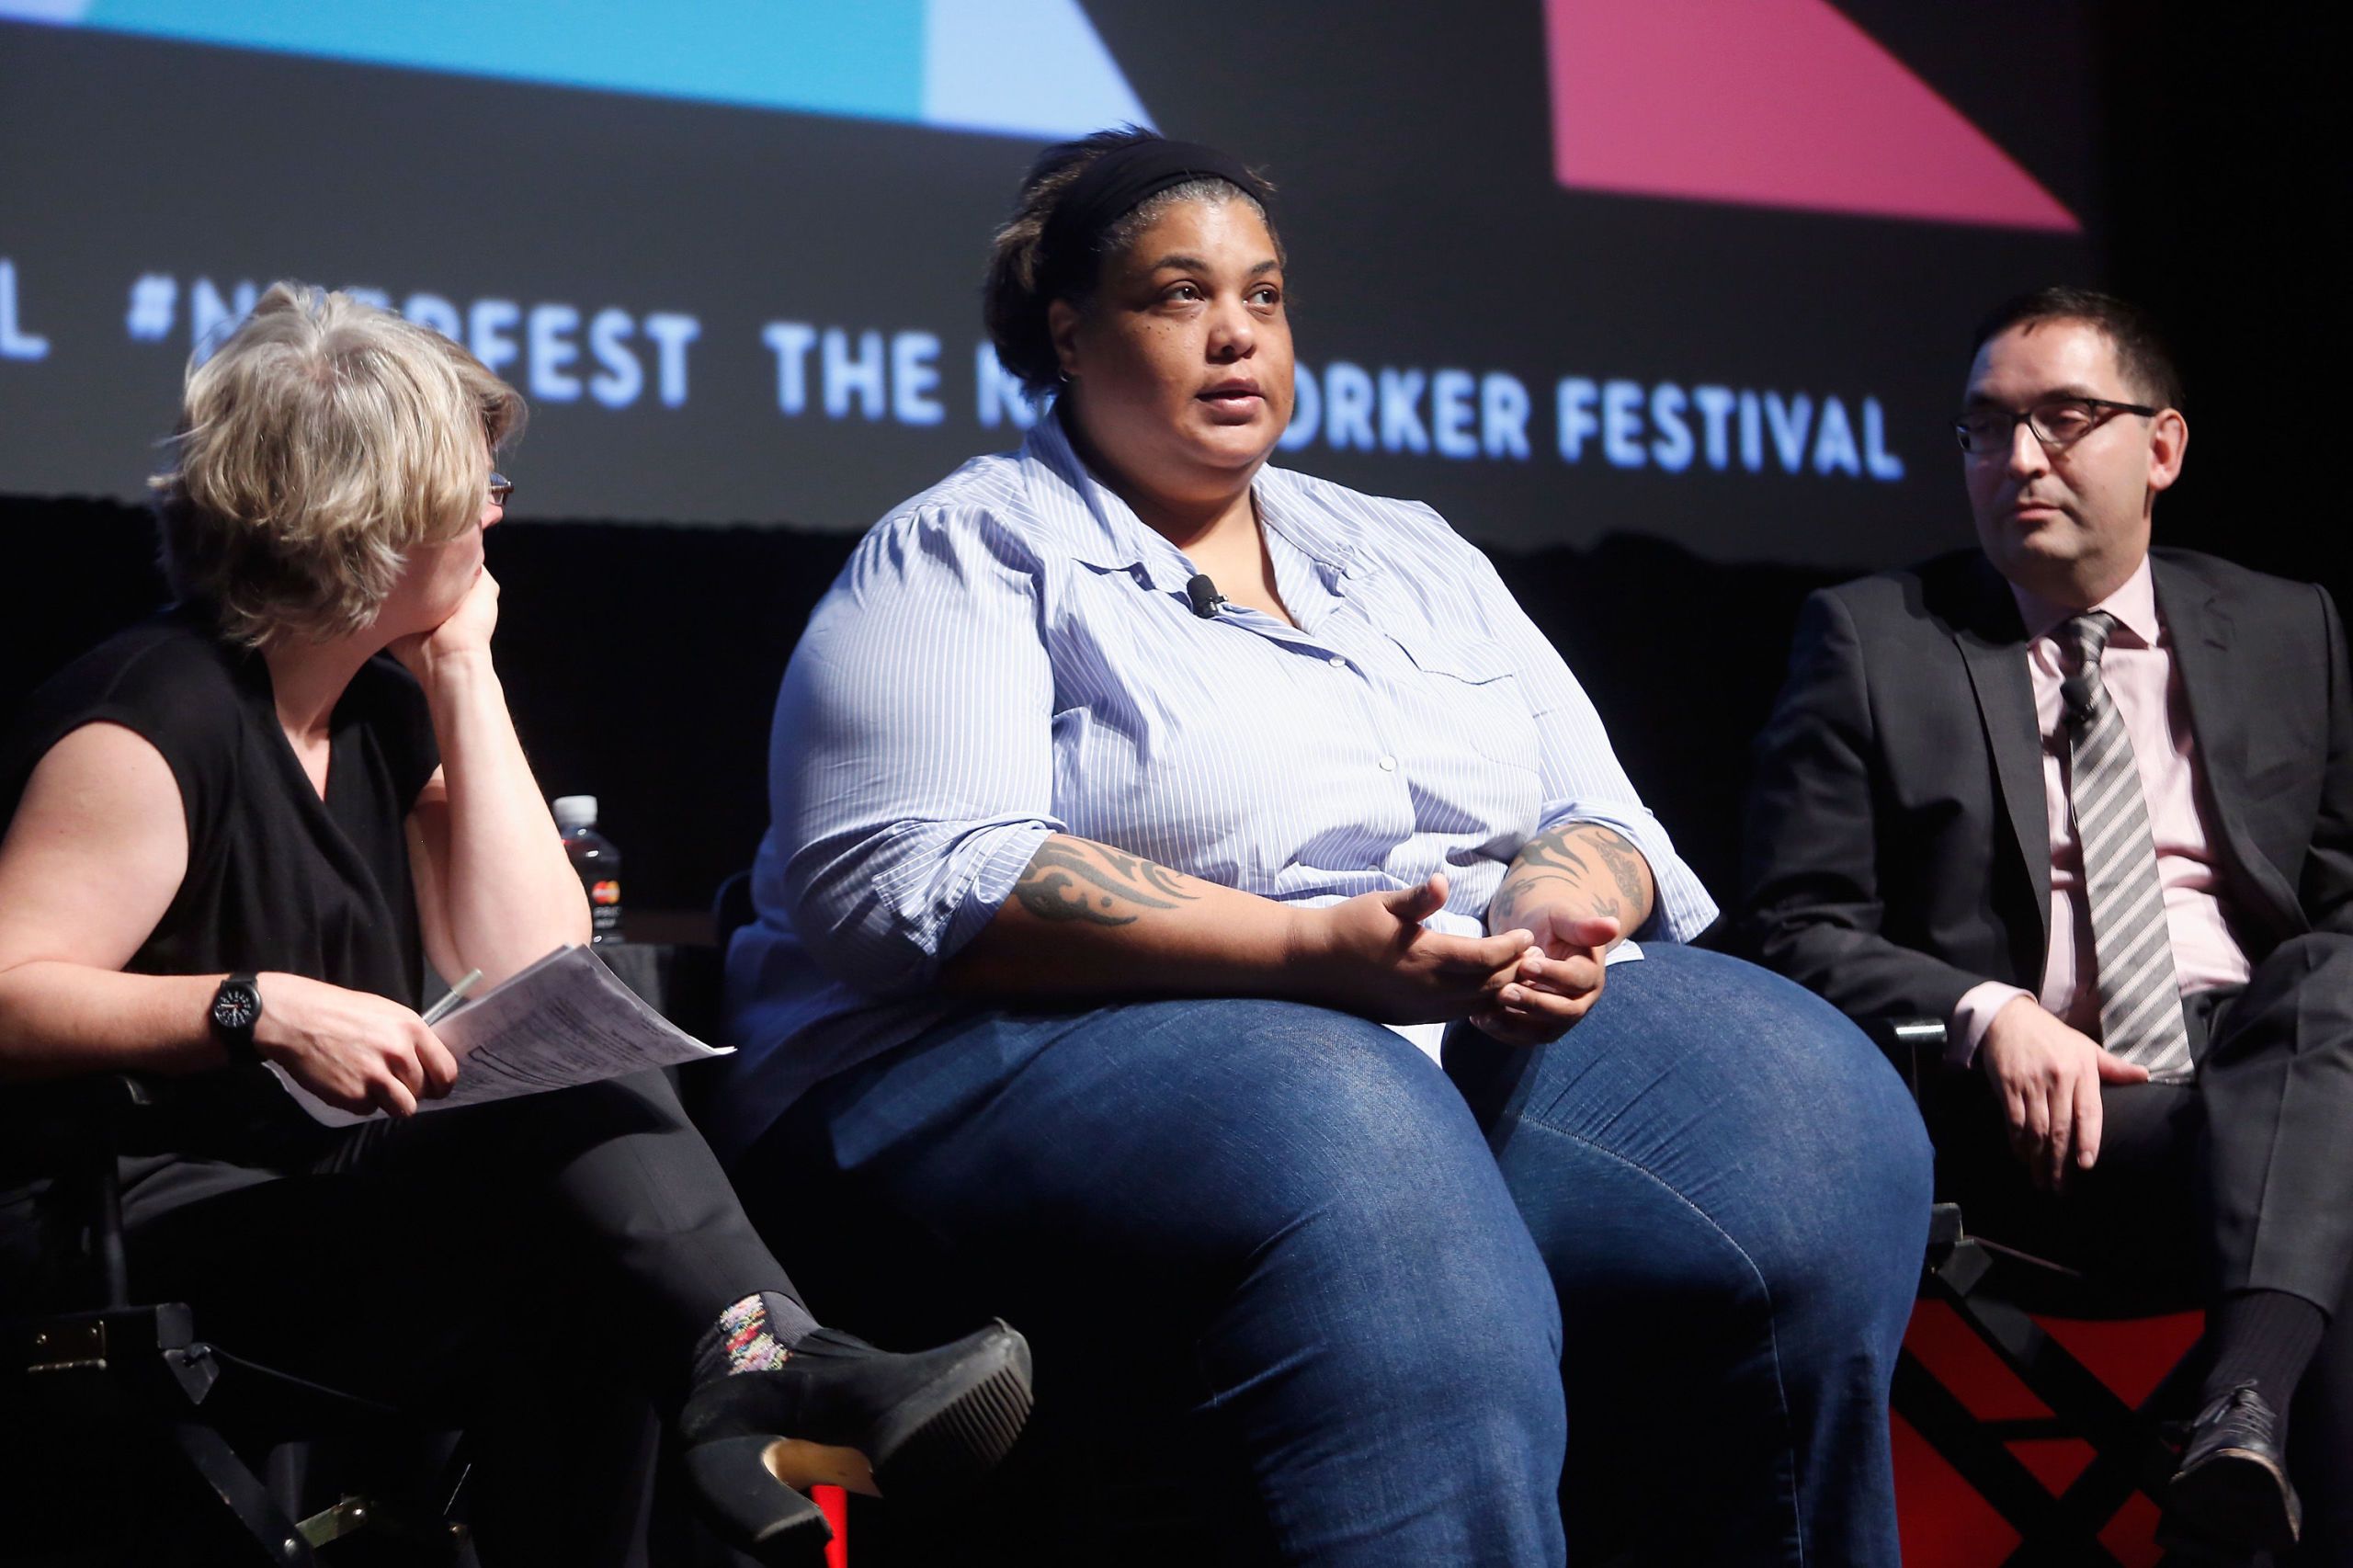 hunger roxane gay early release